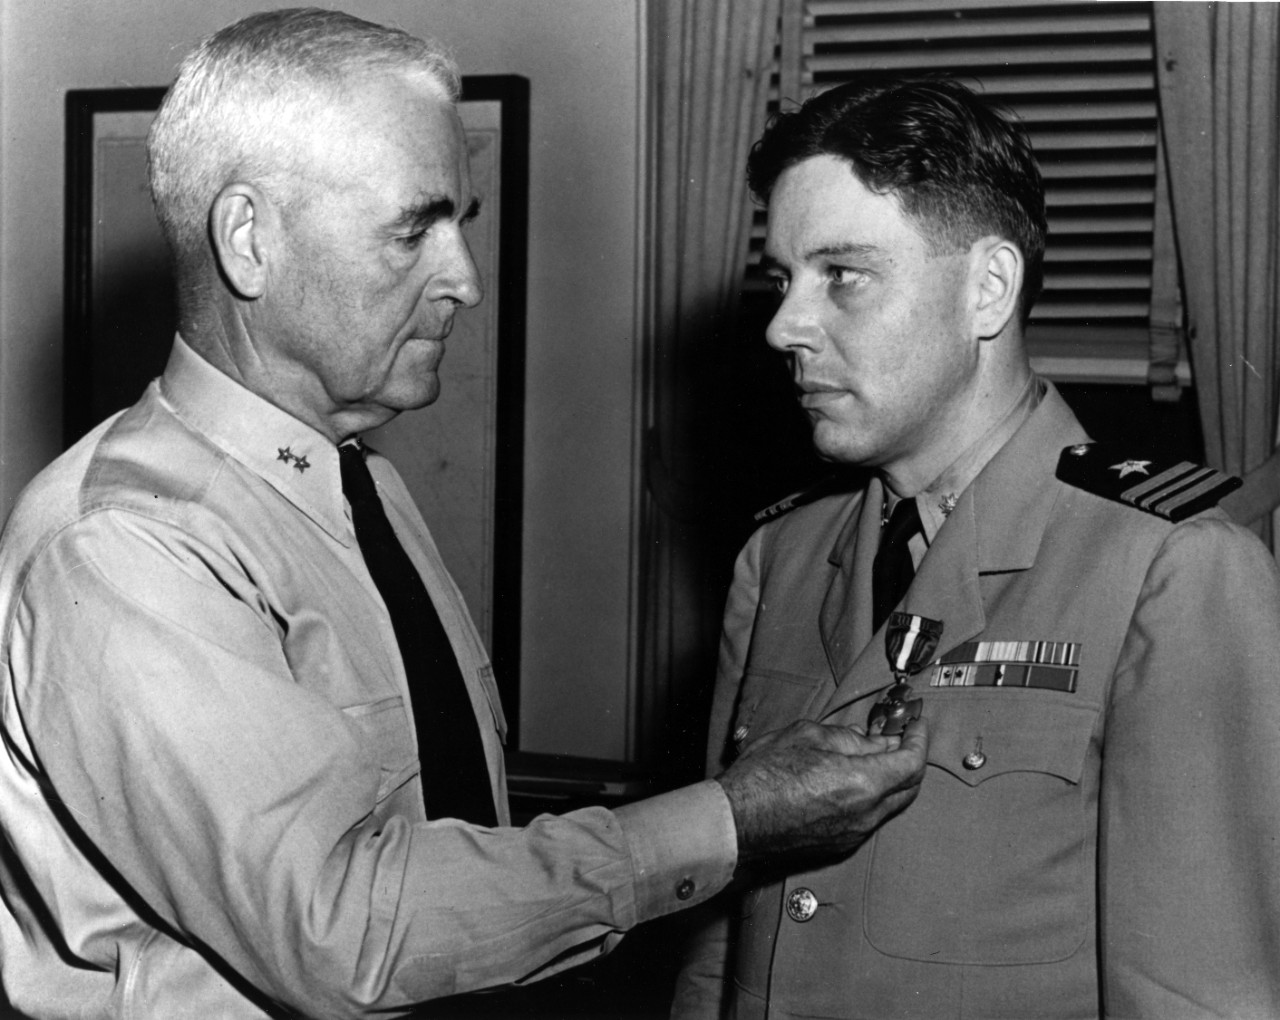 Rear Adm. David M. LeBreton awards Lt. Cmdr. Copeland the Navy Cross for heroism while in command of Samuel B. Roberts in the Battle off Samar, on 25 October 1944. This ceremony took place at Norfolk, Va., on 16 July 1945. (Naval History and Heri...